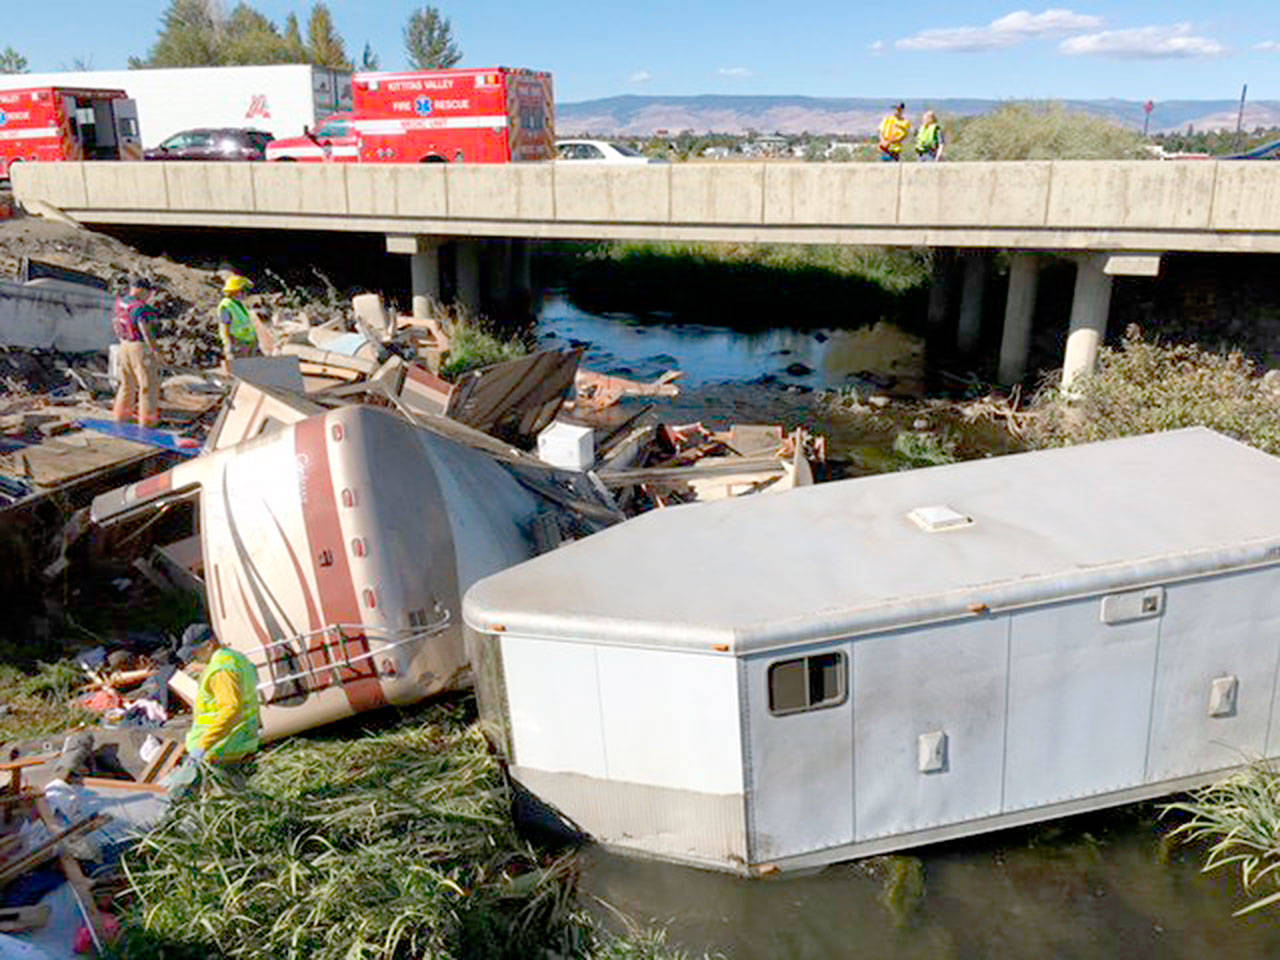 A woman and child from Snohomish County died after this motorhome, which was pulling a trailer, crashed along I-90 near Ellensburg on Monday. (Washington State Patrol)